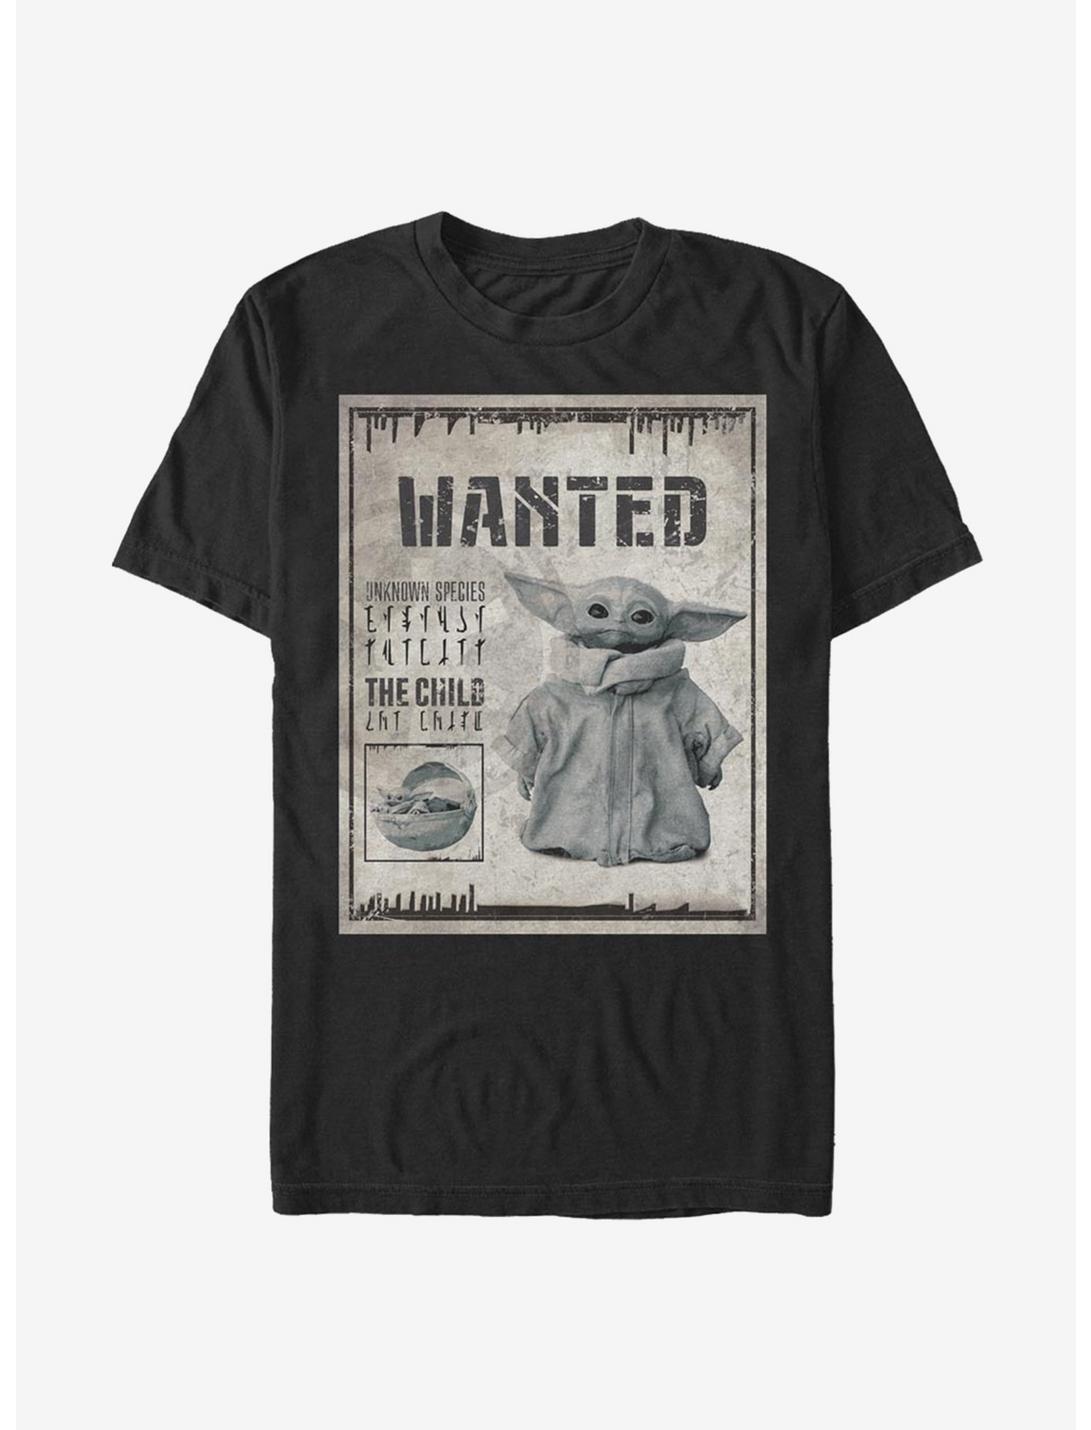 Star Wars The Mandalorian Wanted The Child Poster T-Shirt, BLACK, hi-res